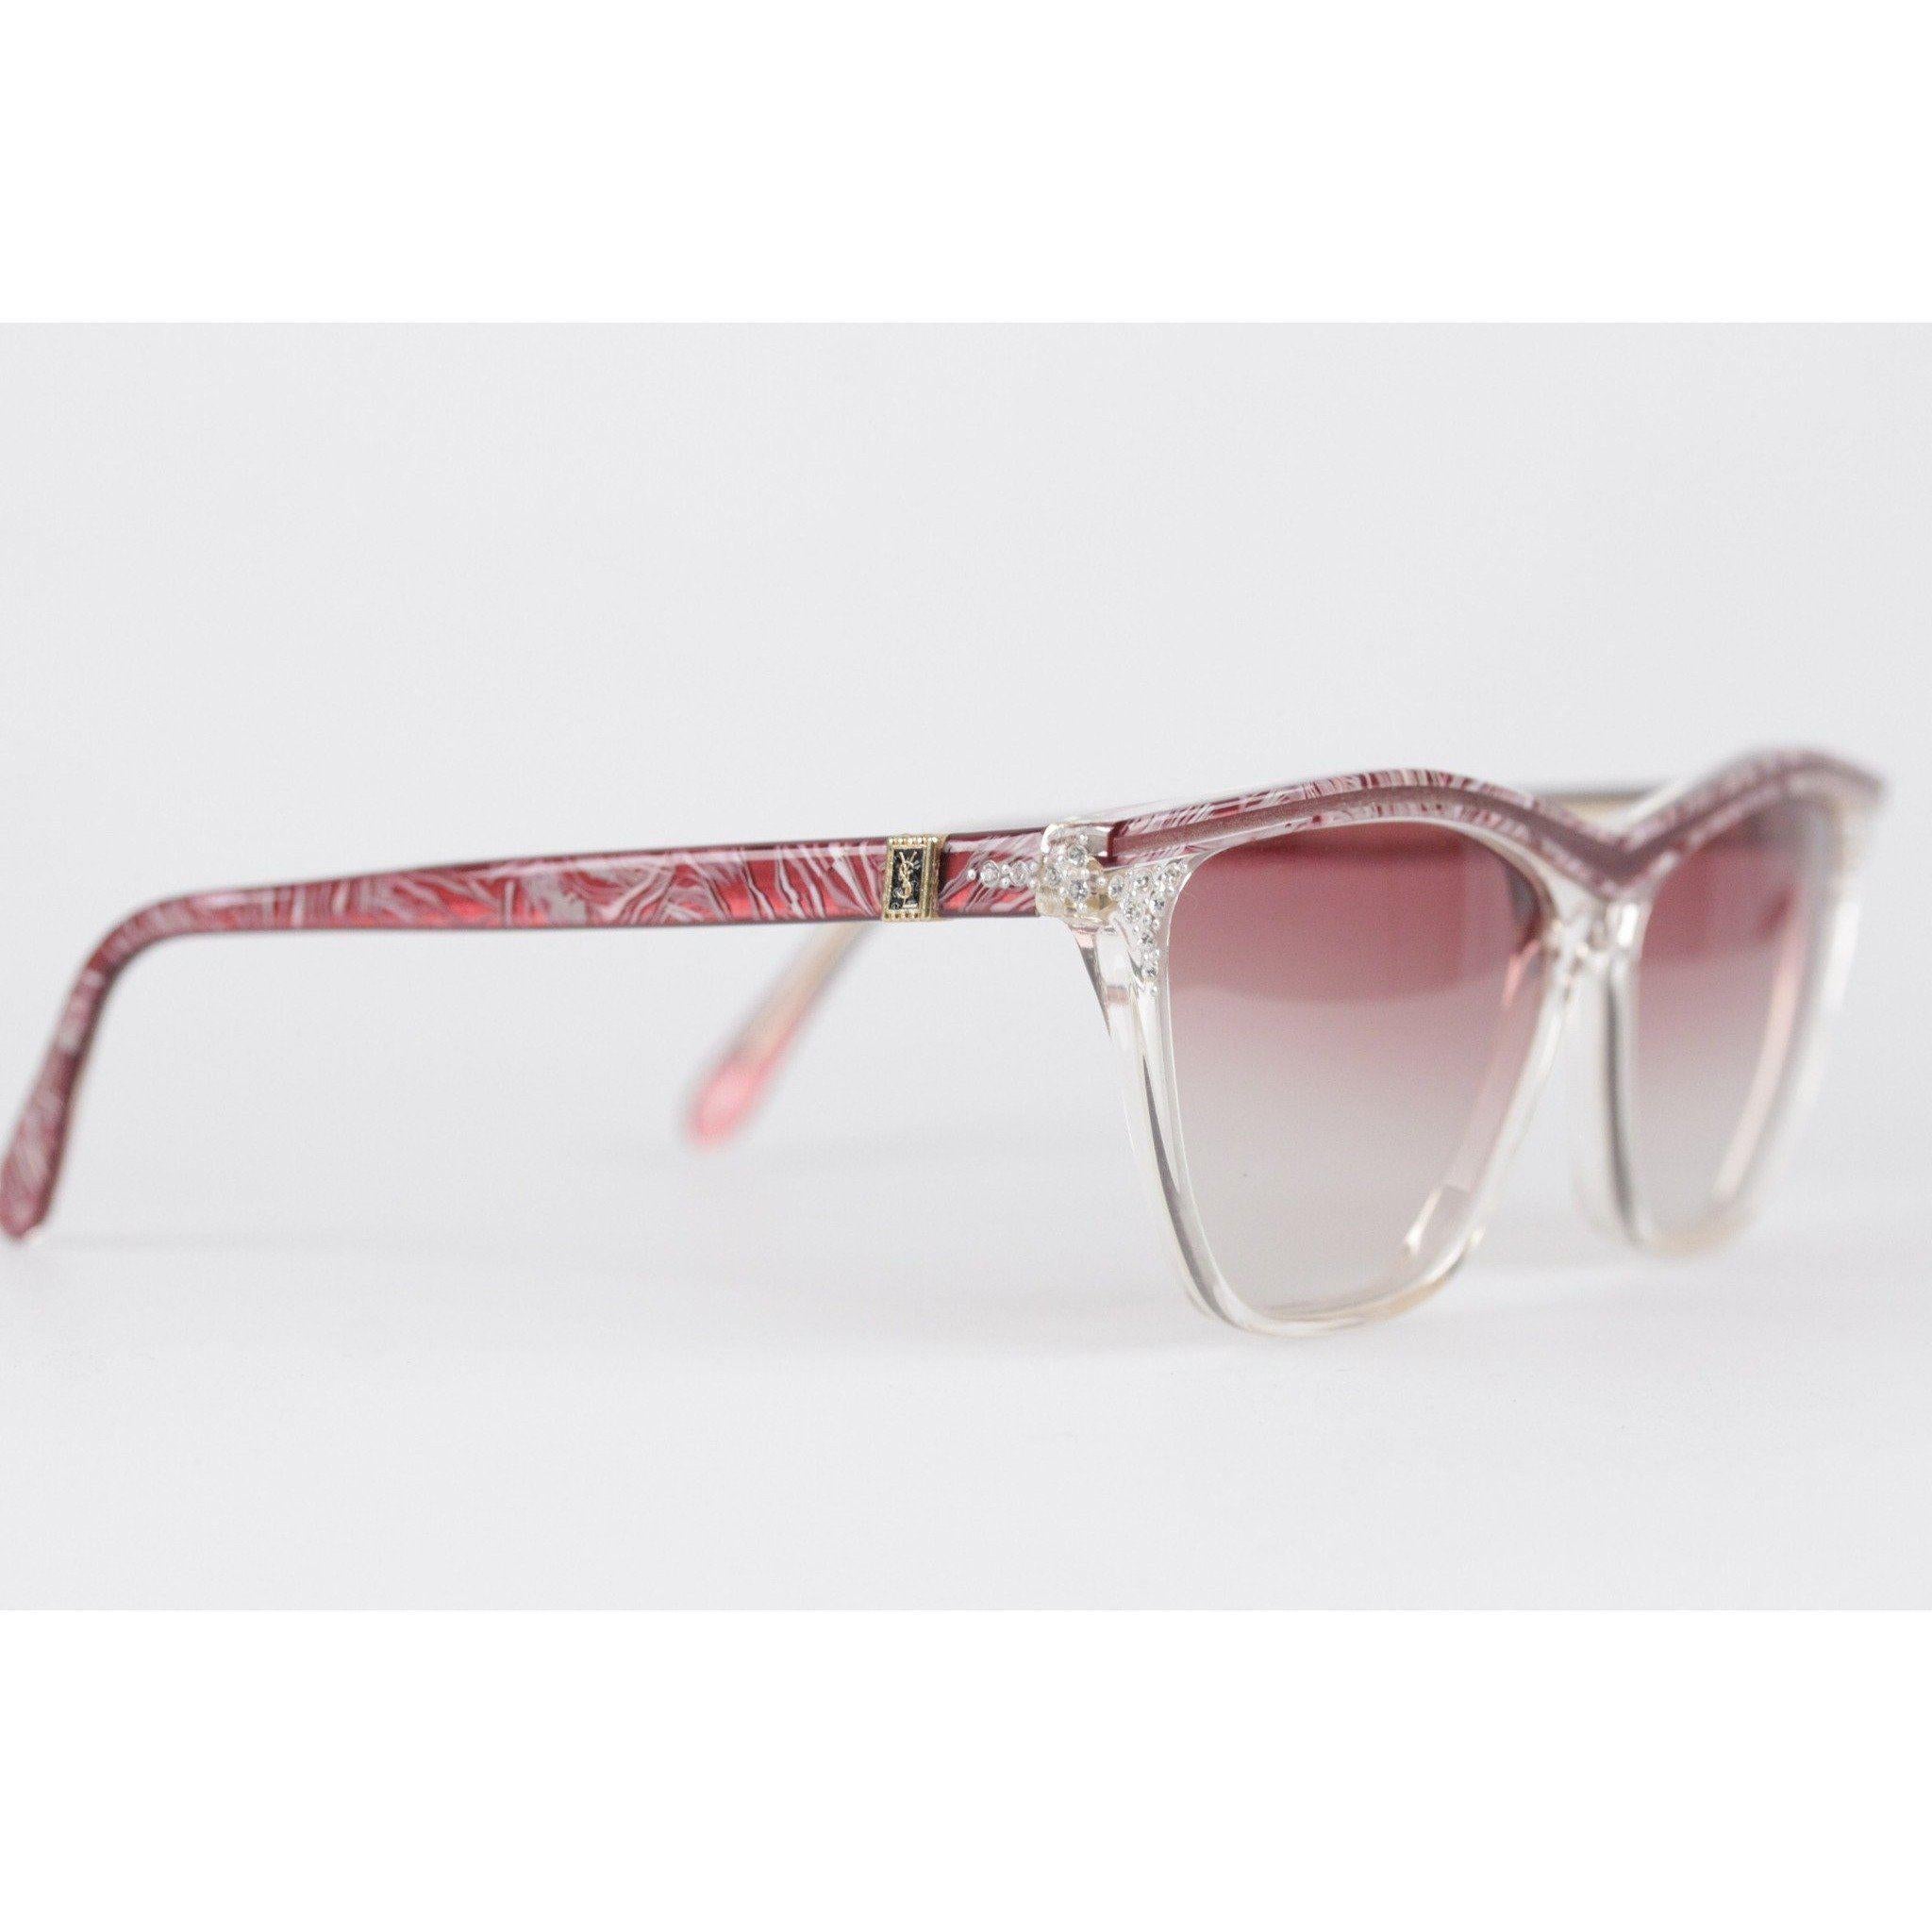 YVES SAINT LAURENT Vintage MINT Sunglasses HYRTHIOS 58mm w/Rhinestones In Excellent Condition In Rome, Rome